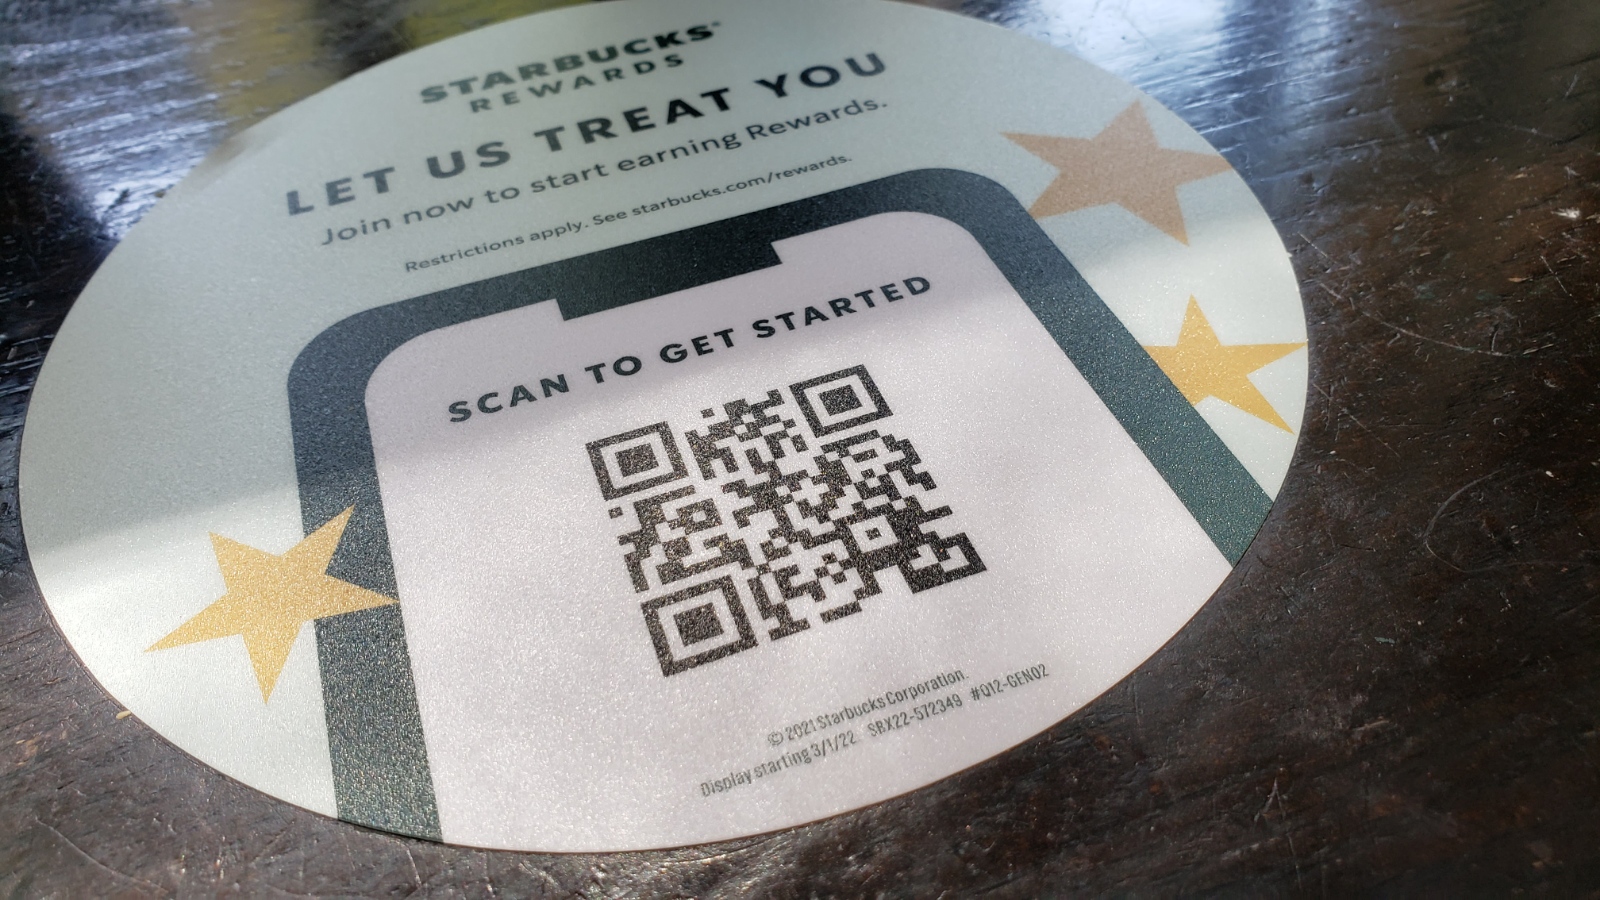 Starbucks Rewards QR Code on Table Top Decal to Download App